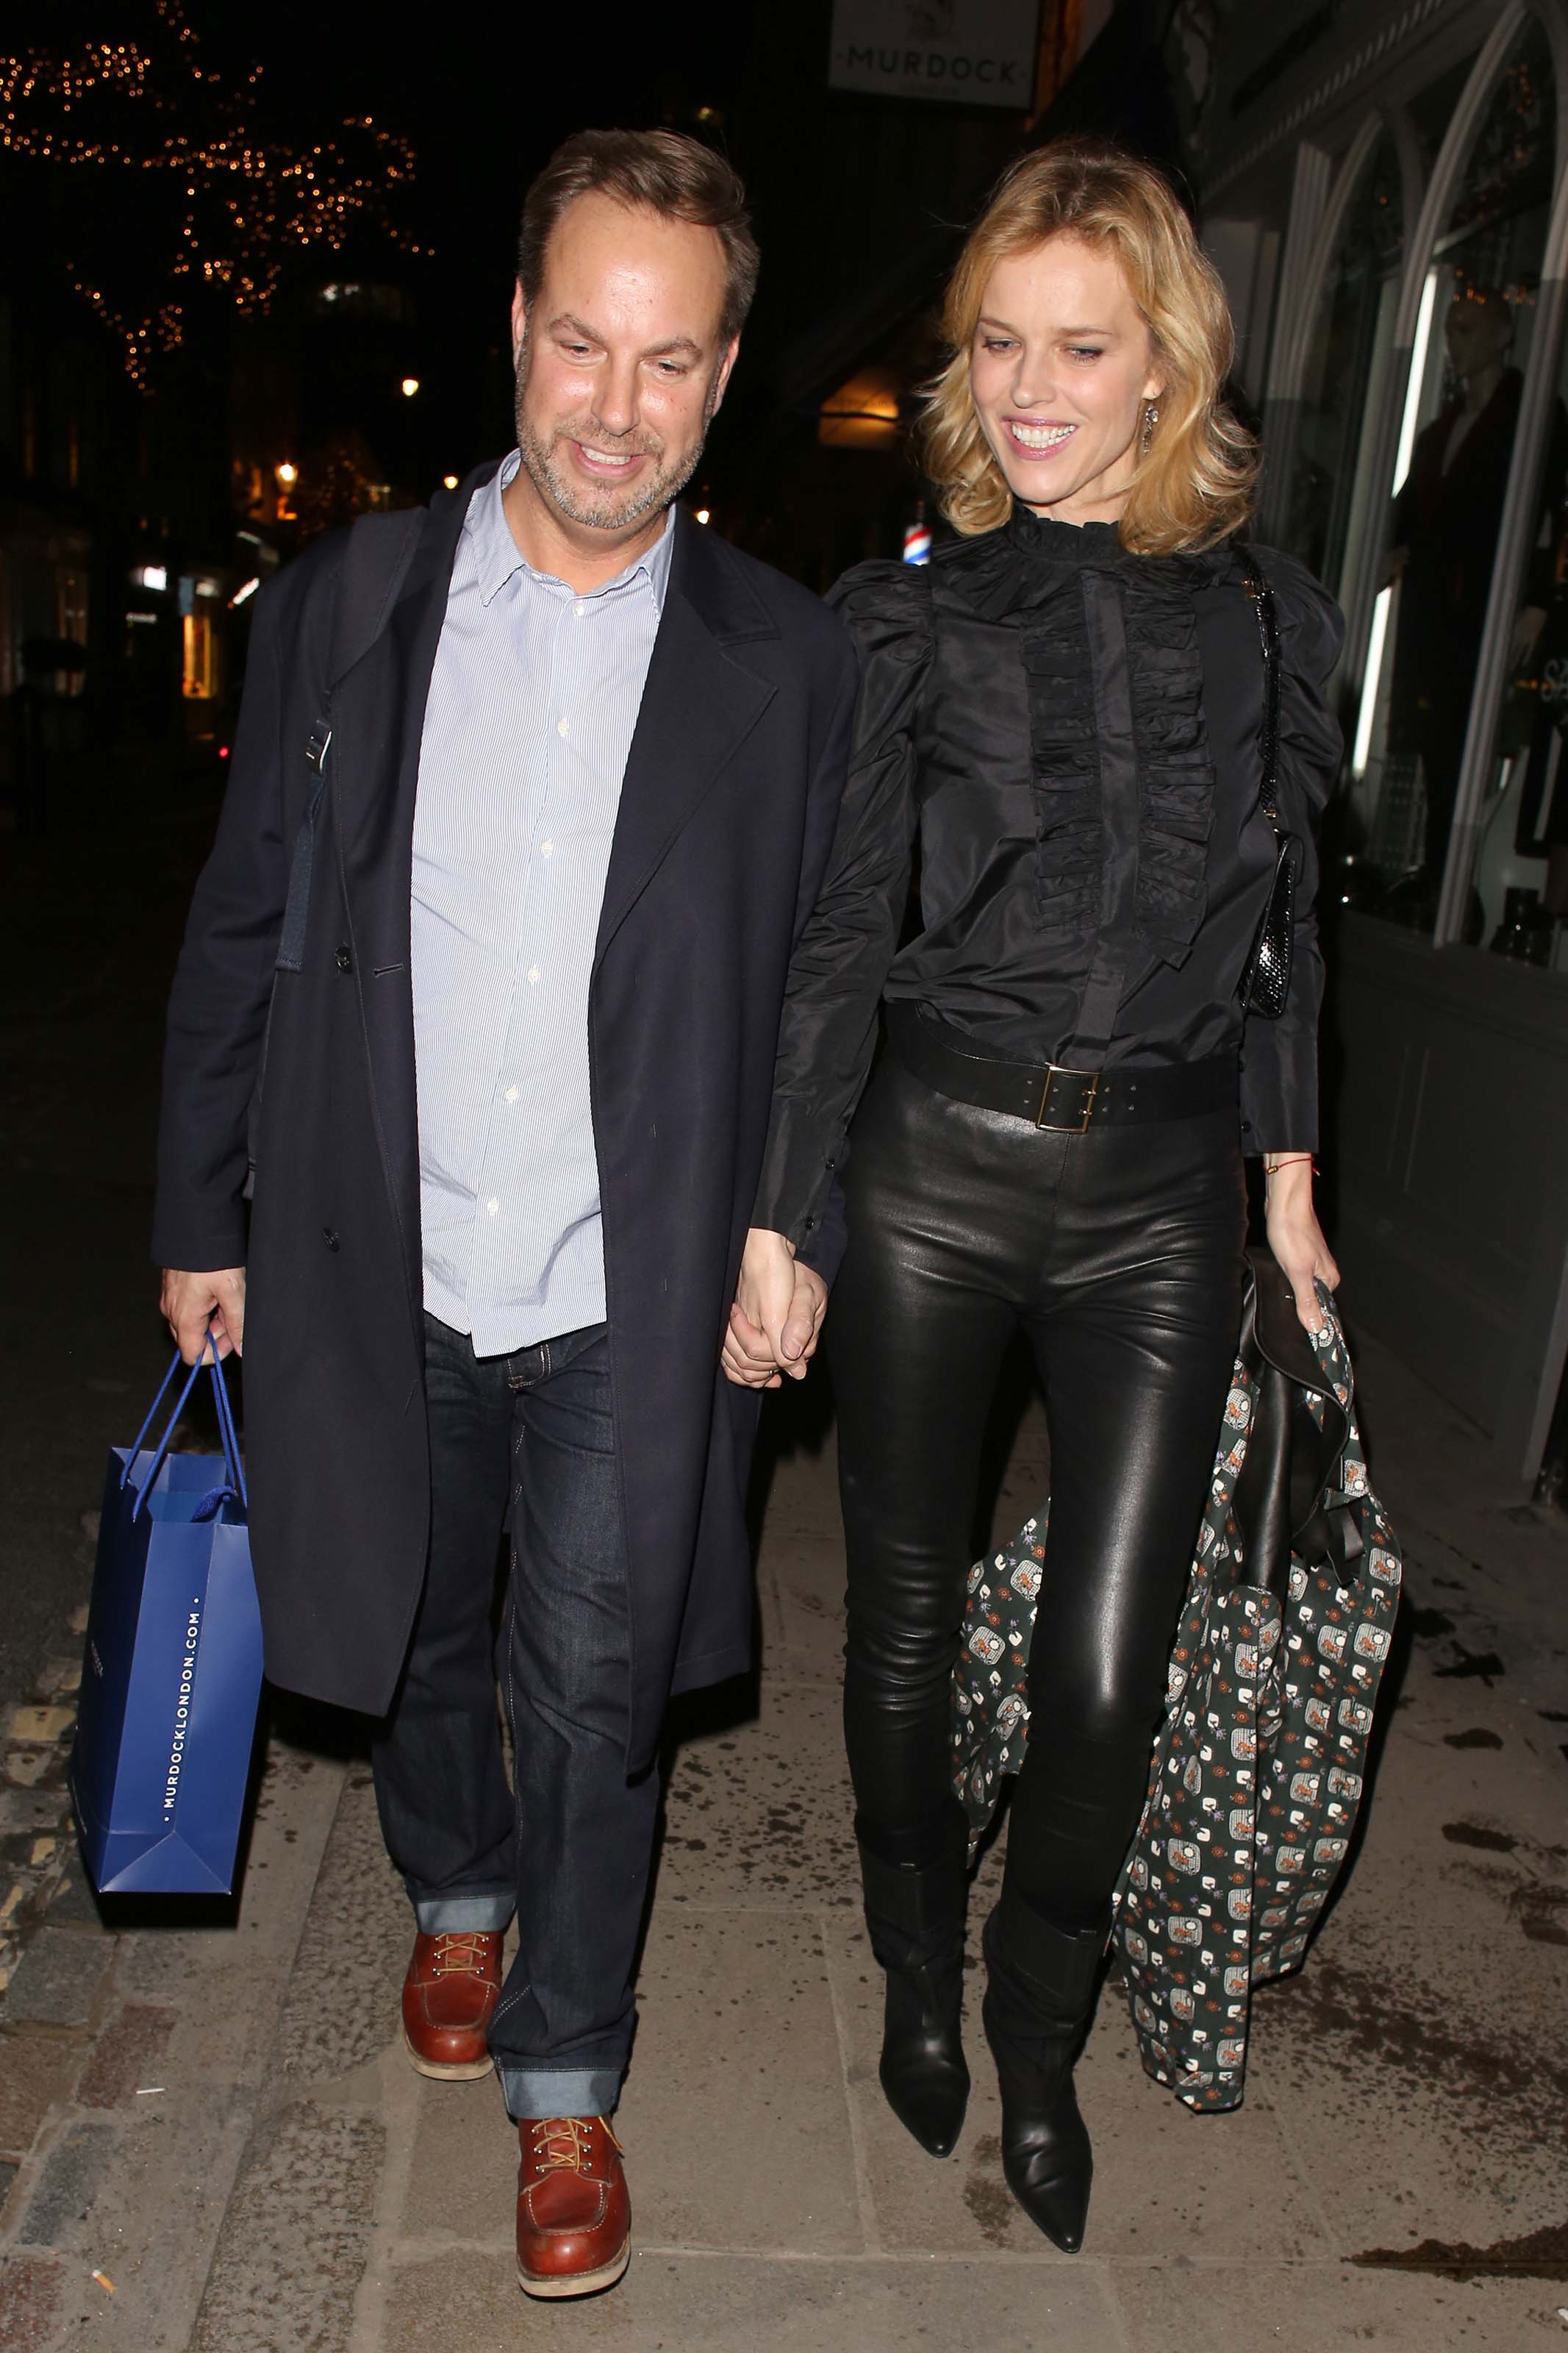 Eva Herzigova out and about in London